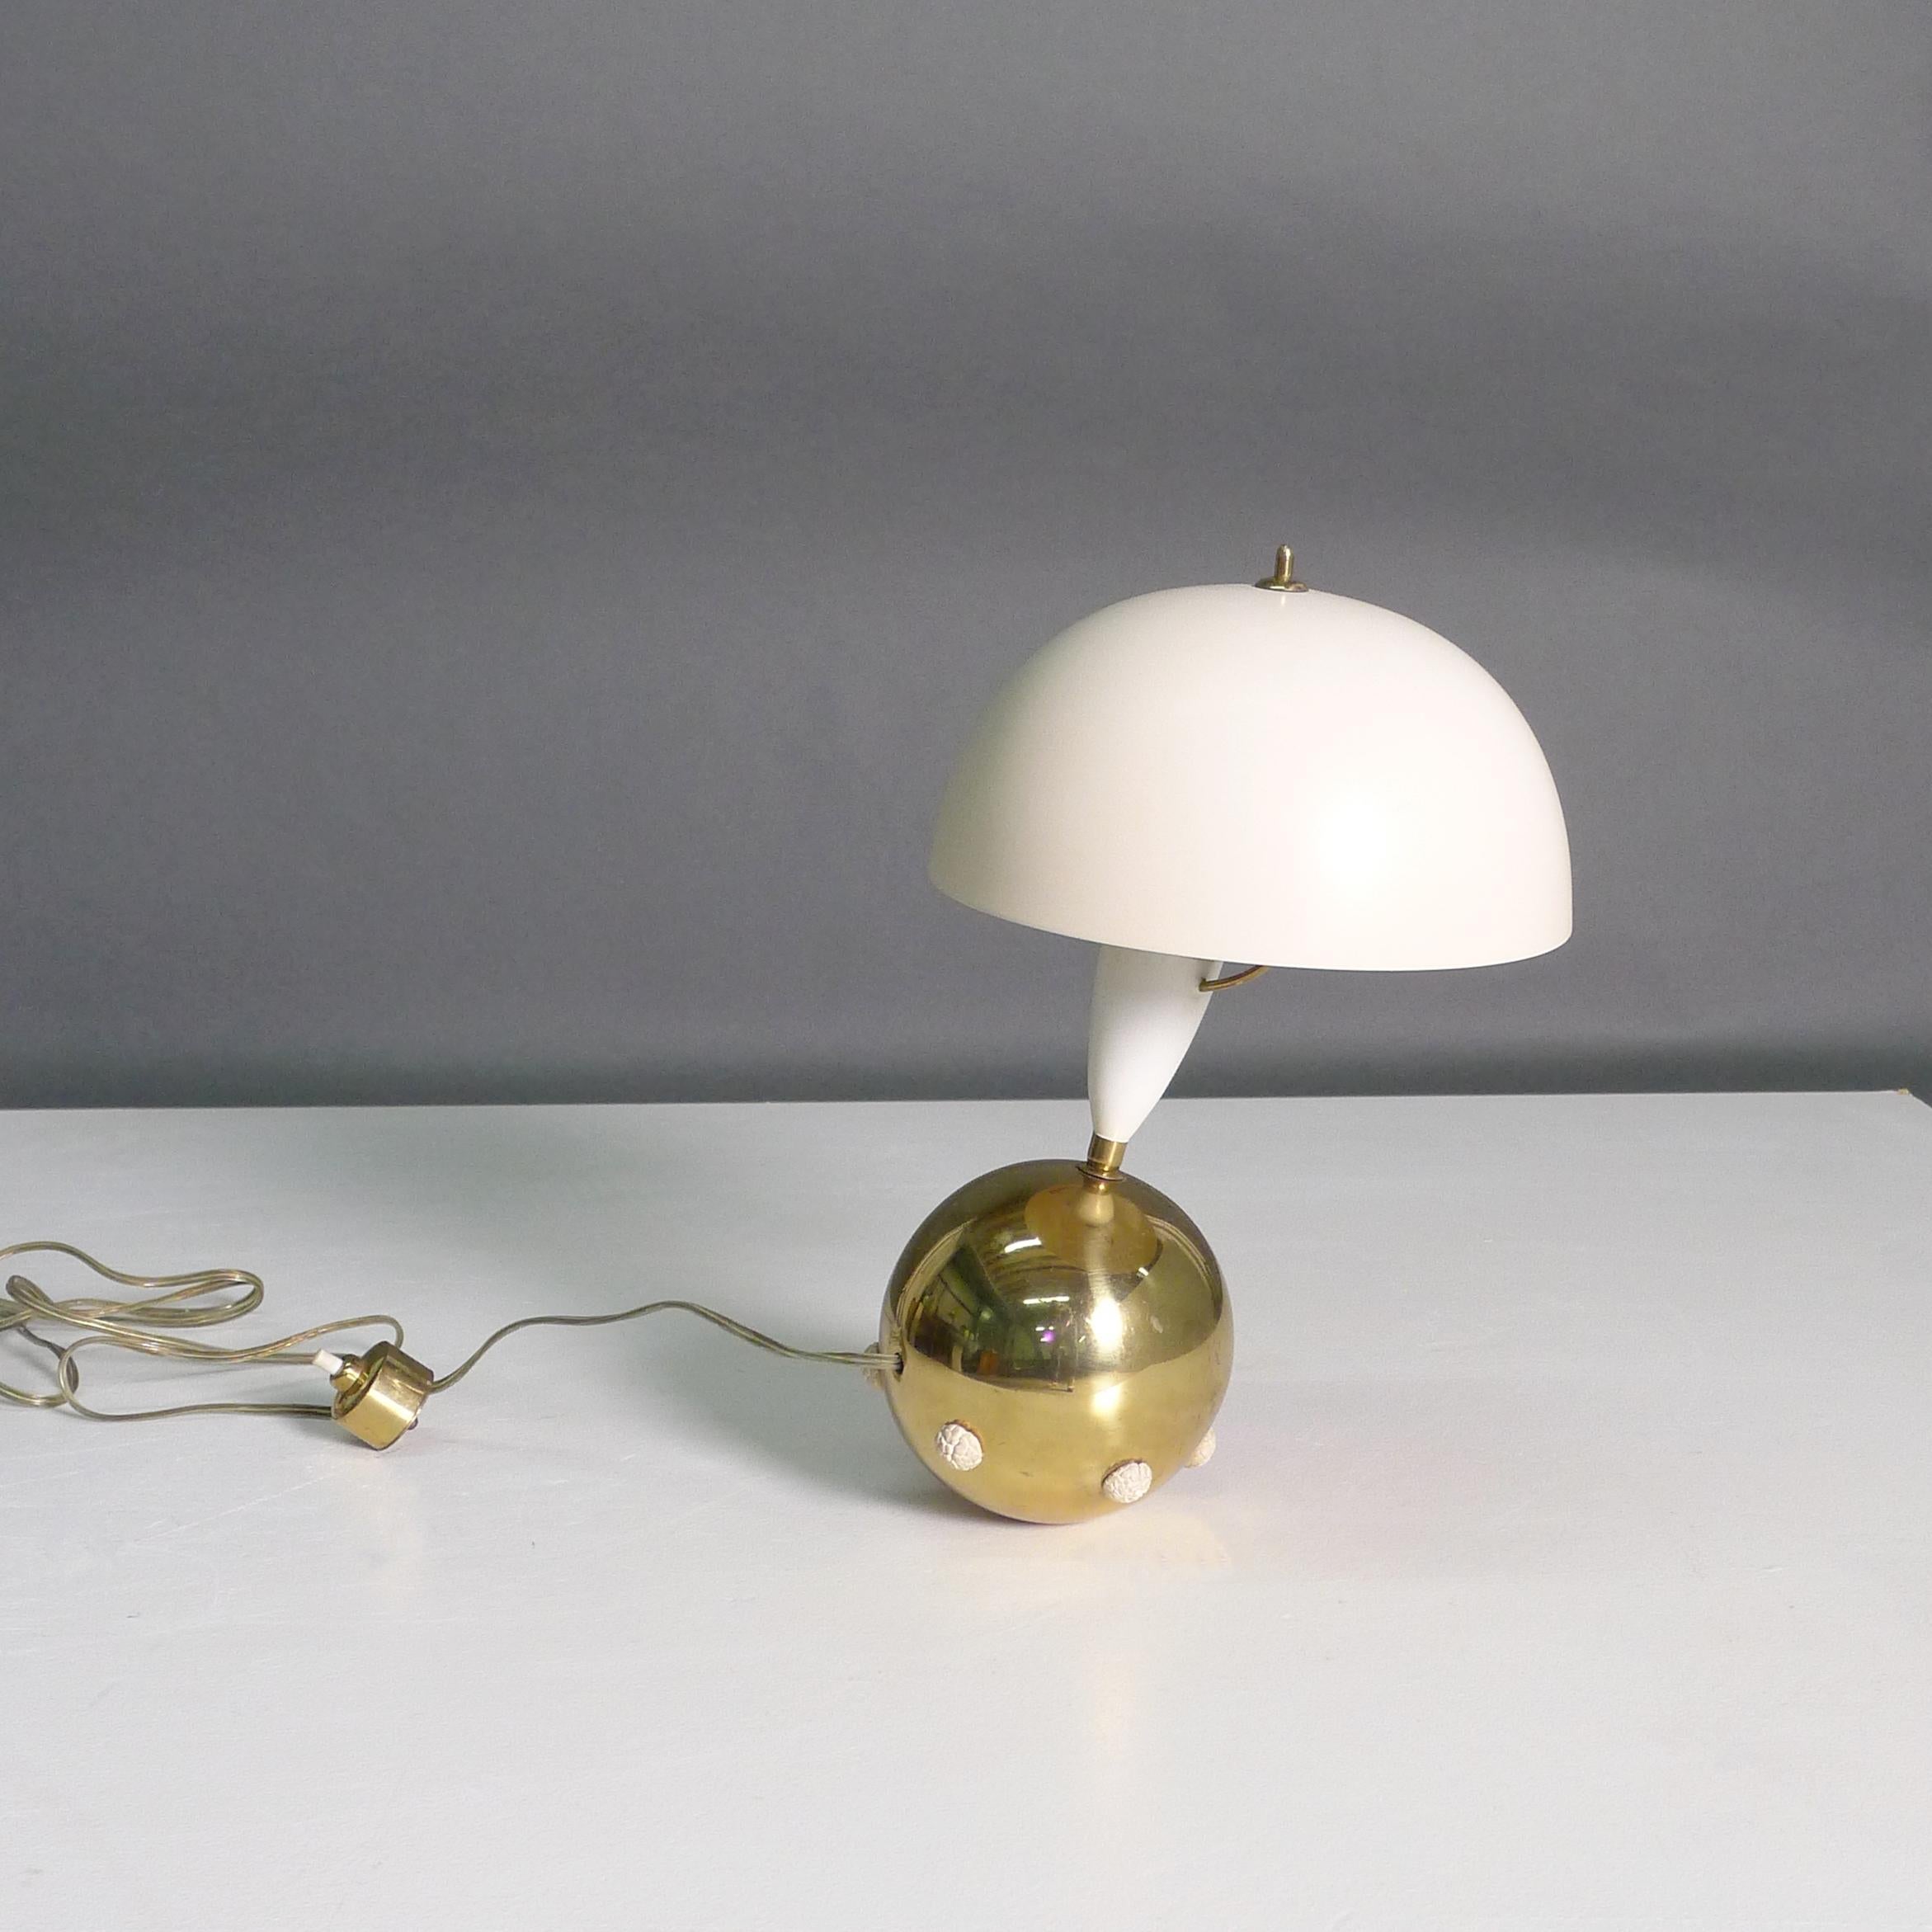 Angelo Lelii for Arredoluce, Italy

Model 12405 table lamp, designed 1952 and manufactured throughout the 1950s.  With cream lacquered aluminium reflector on a spherical base in polished brass with rubber studs, the push button in cast brass. 